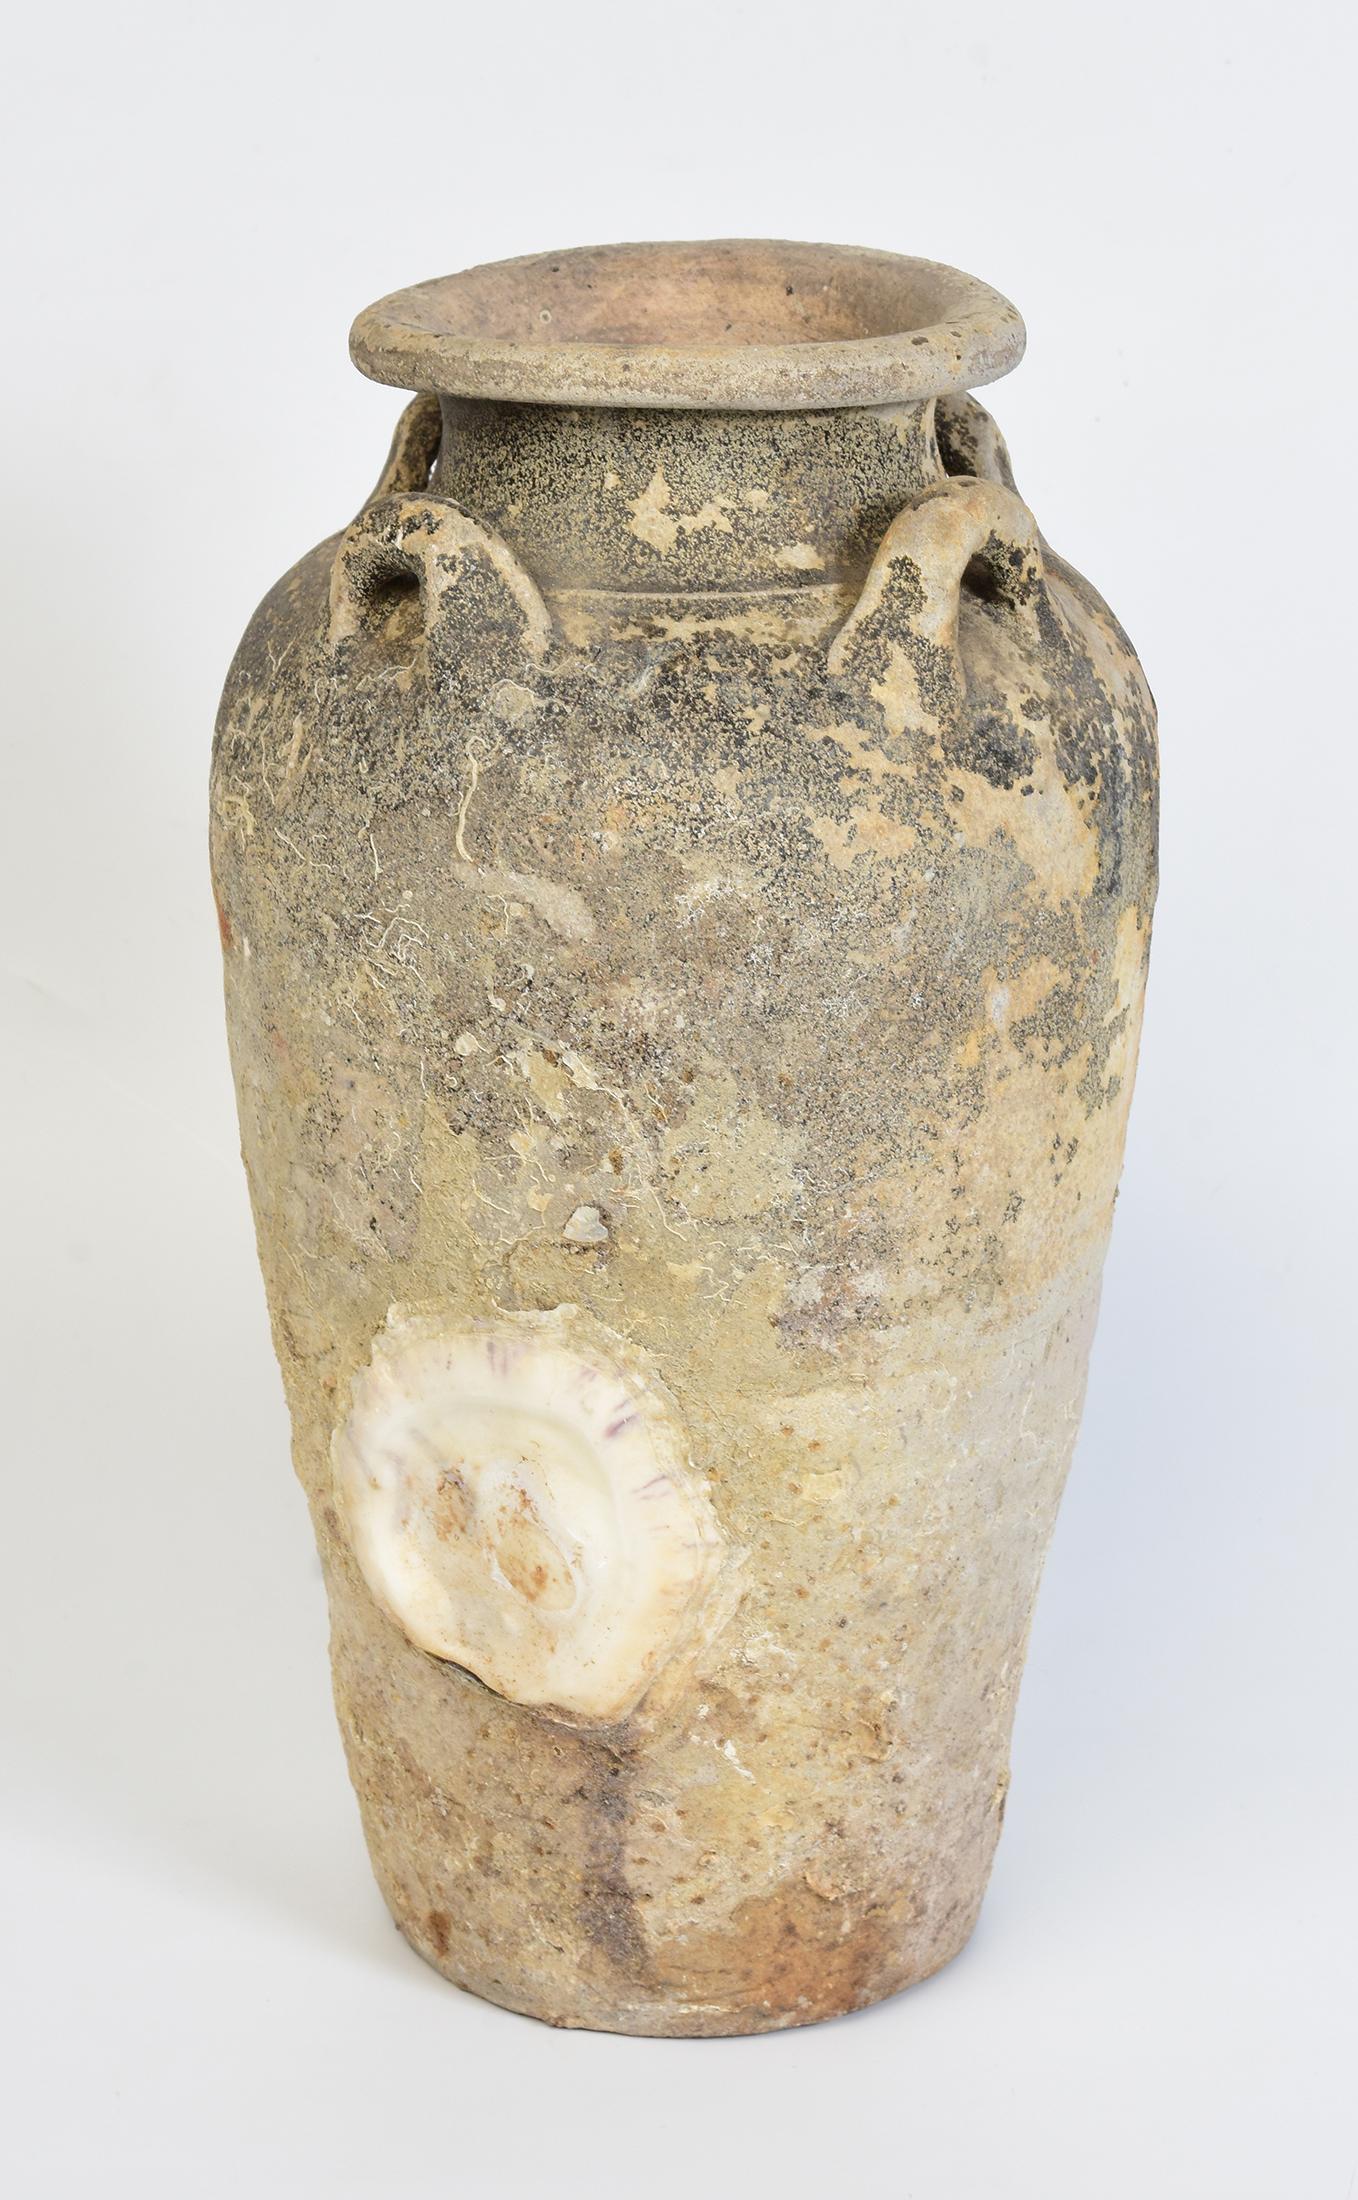 Sukhothai pottery jar with natural shell and barnacle from shipwreck.

Age: Thailand, Sukhothai Period, 14th - 16th Century
Size: Height 31.6 C.M. / Width 16.8 C.M.
Condition: Nice condition overall (some expected degradation due to its